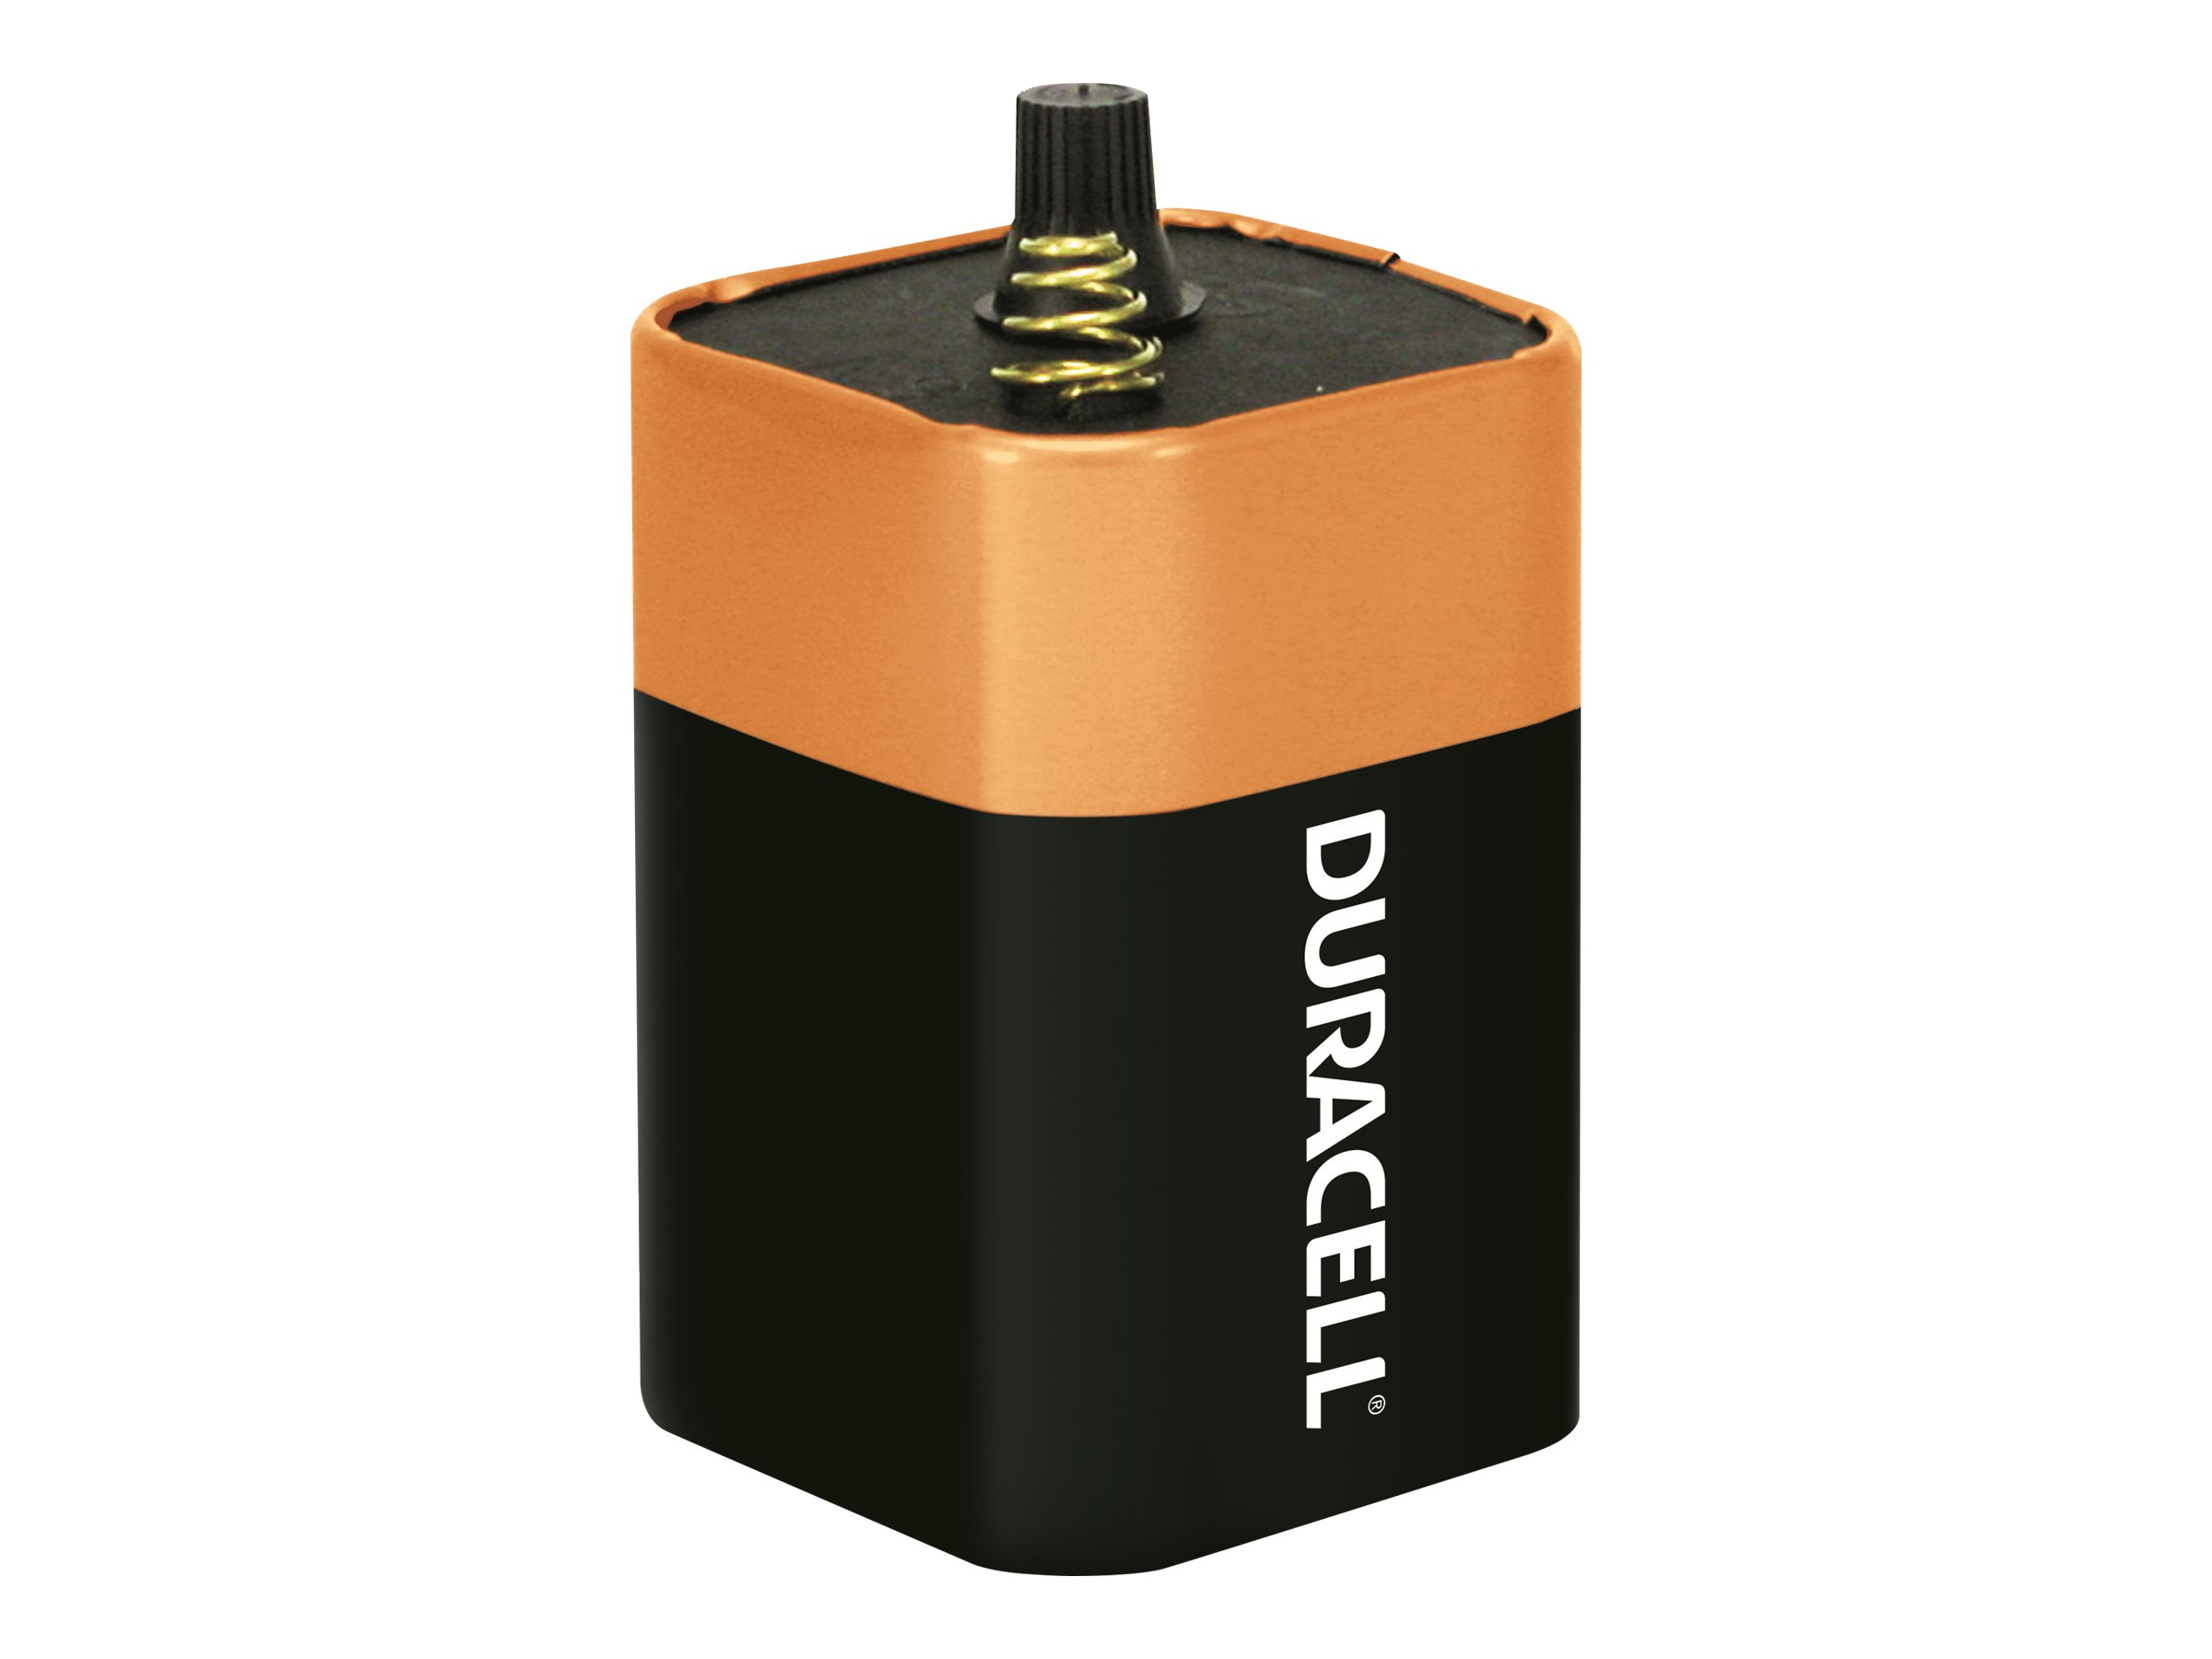 Duracell Lantern Battery with Spring